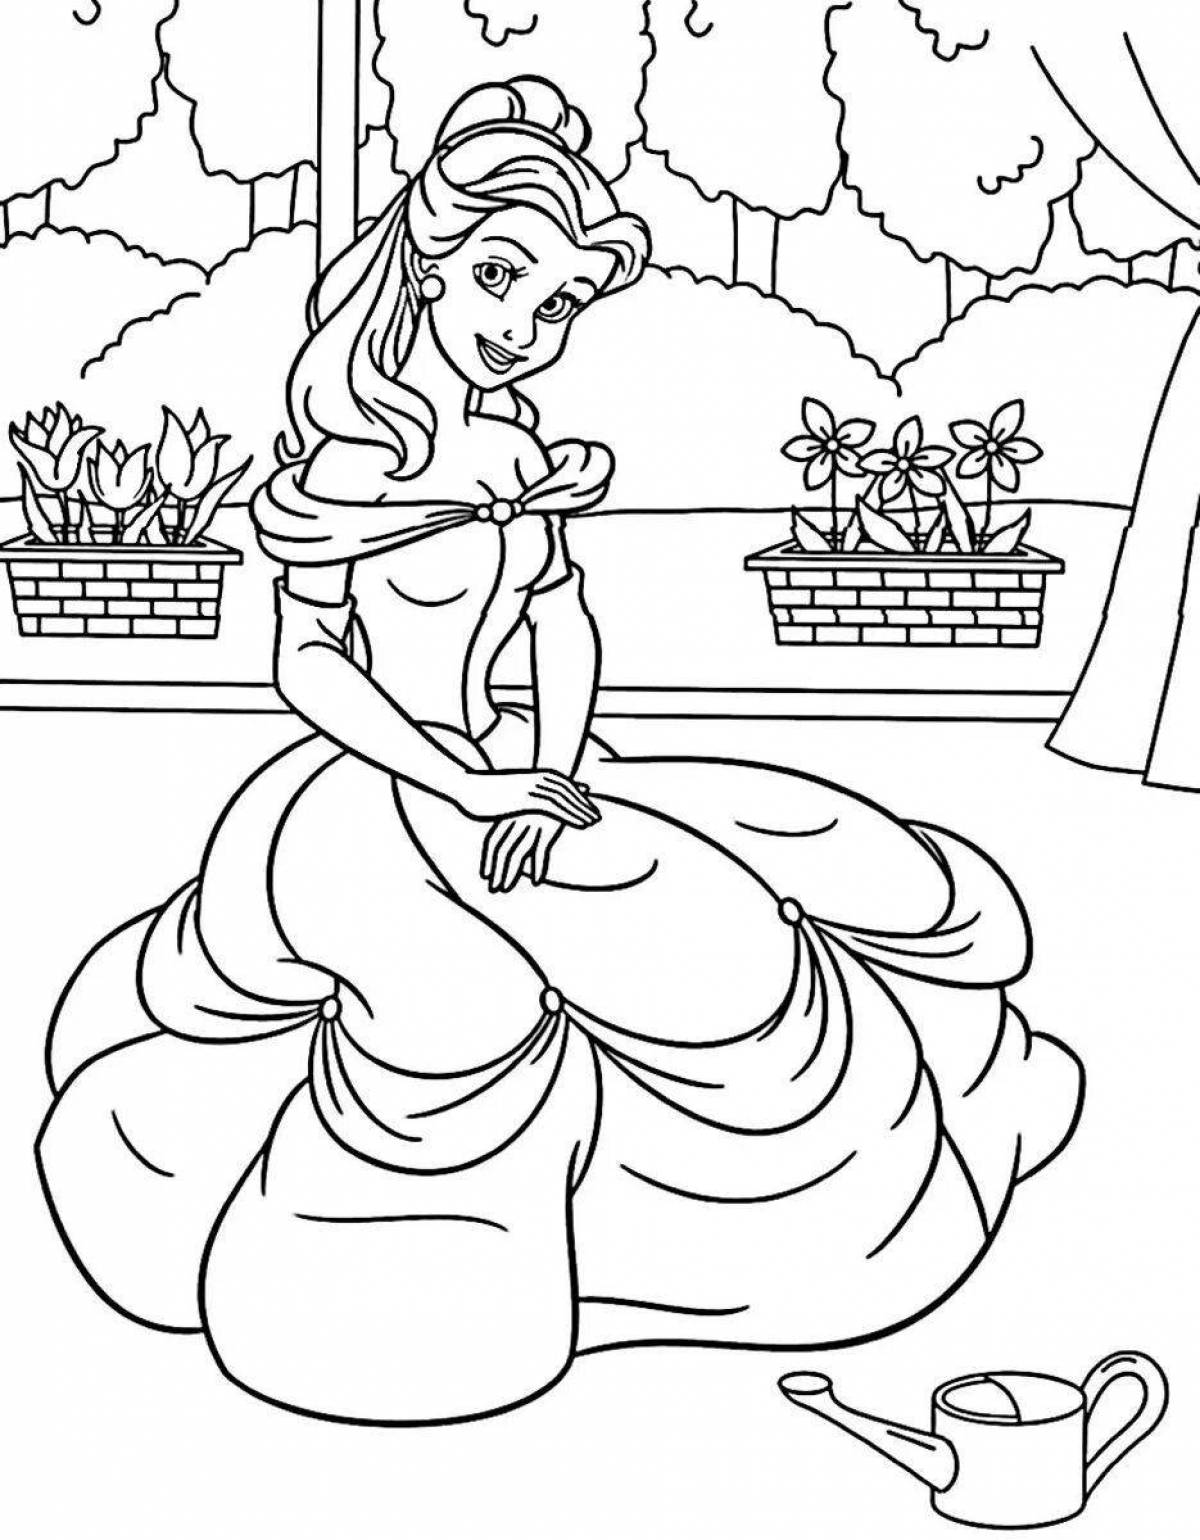 Coloring page charming princess belle